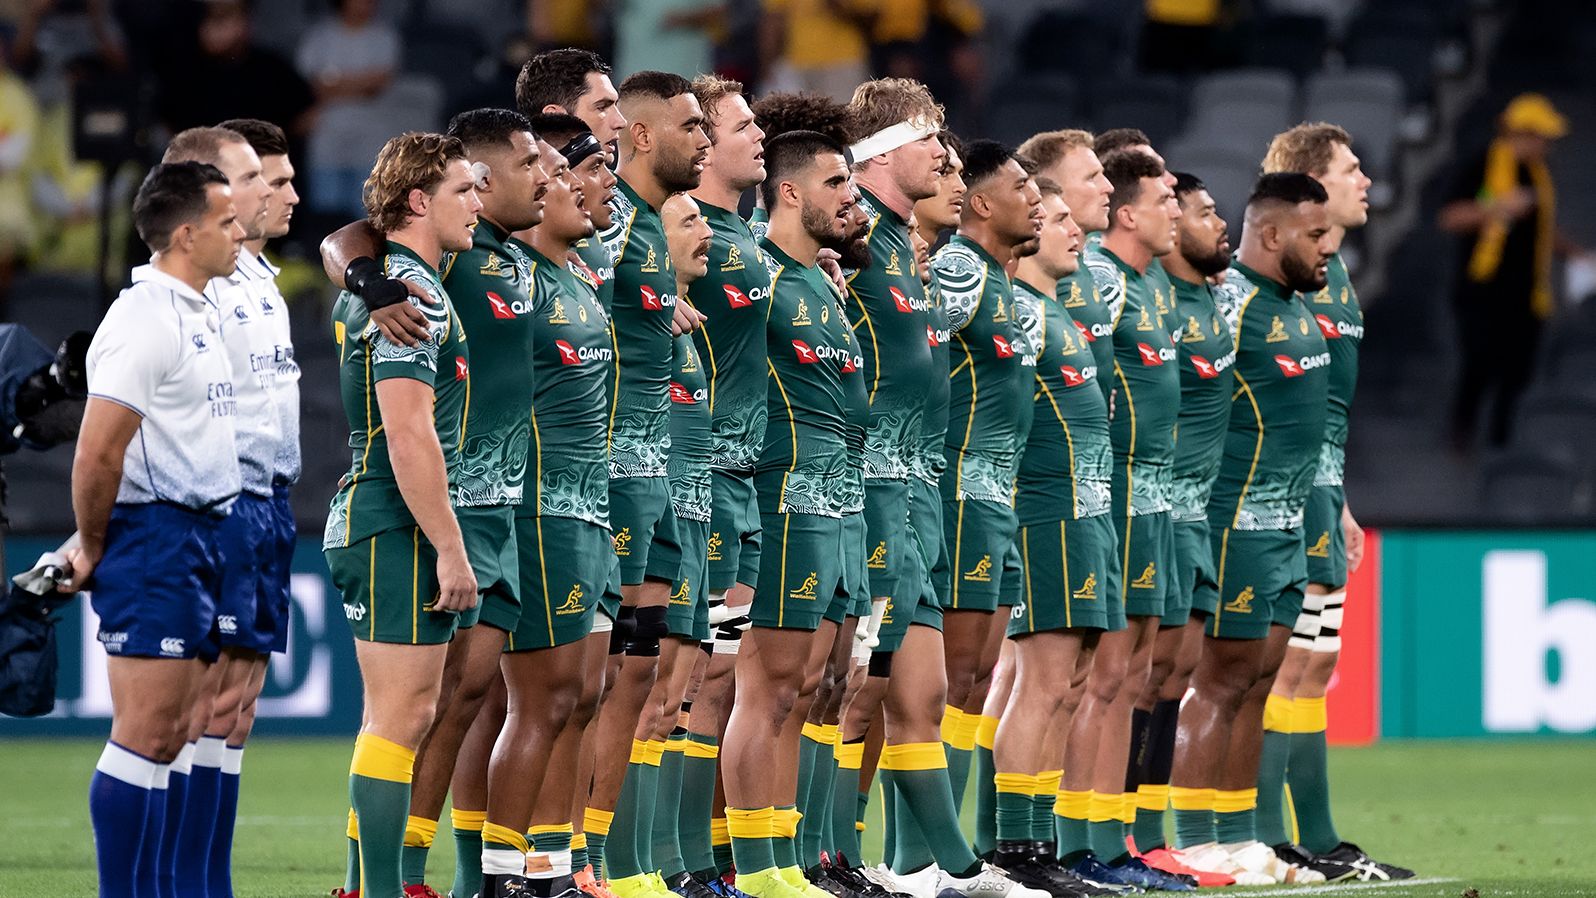 Australia sings the national anthem during the Tri-Nations rugby match between the Australian Wallabies and Argentina Pumas on December 5, 2020 in Sydney.